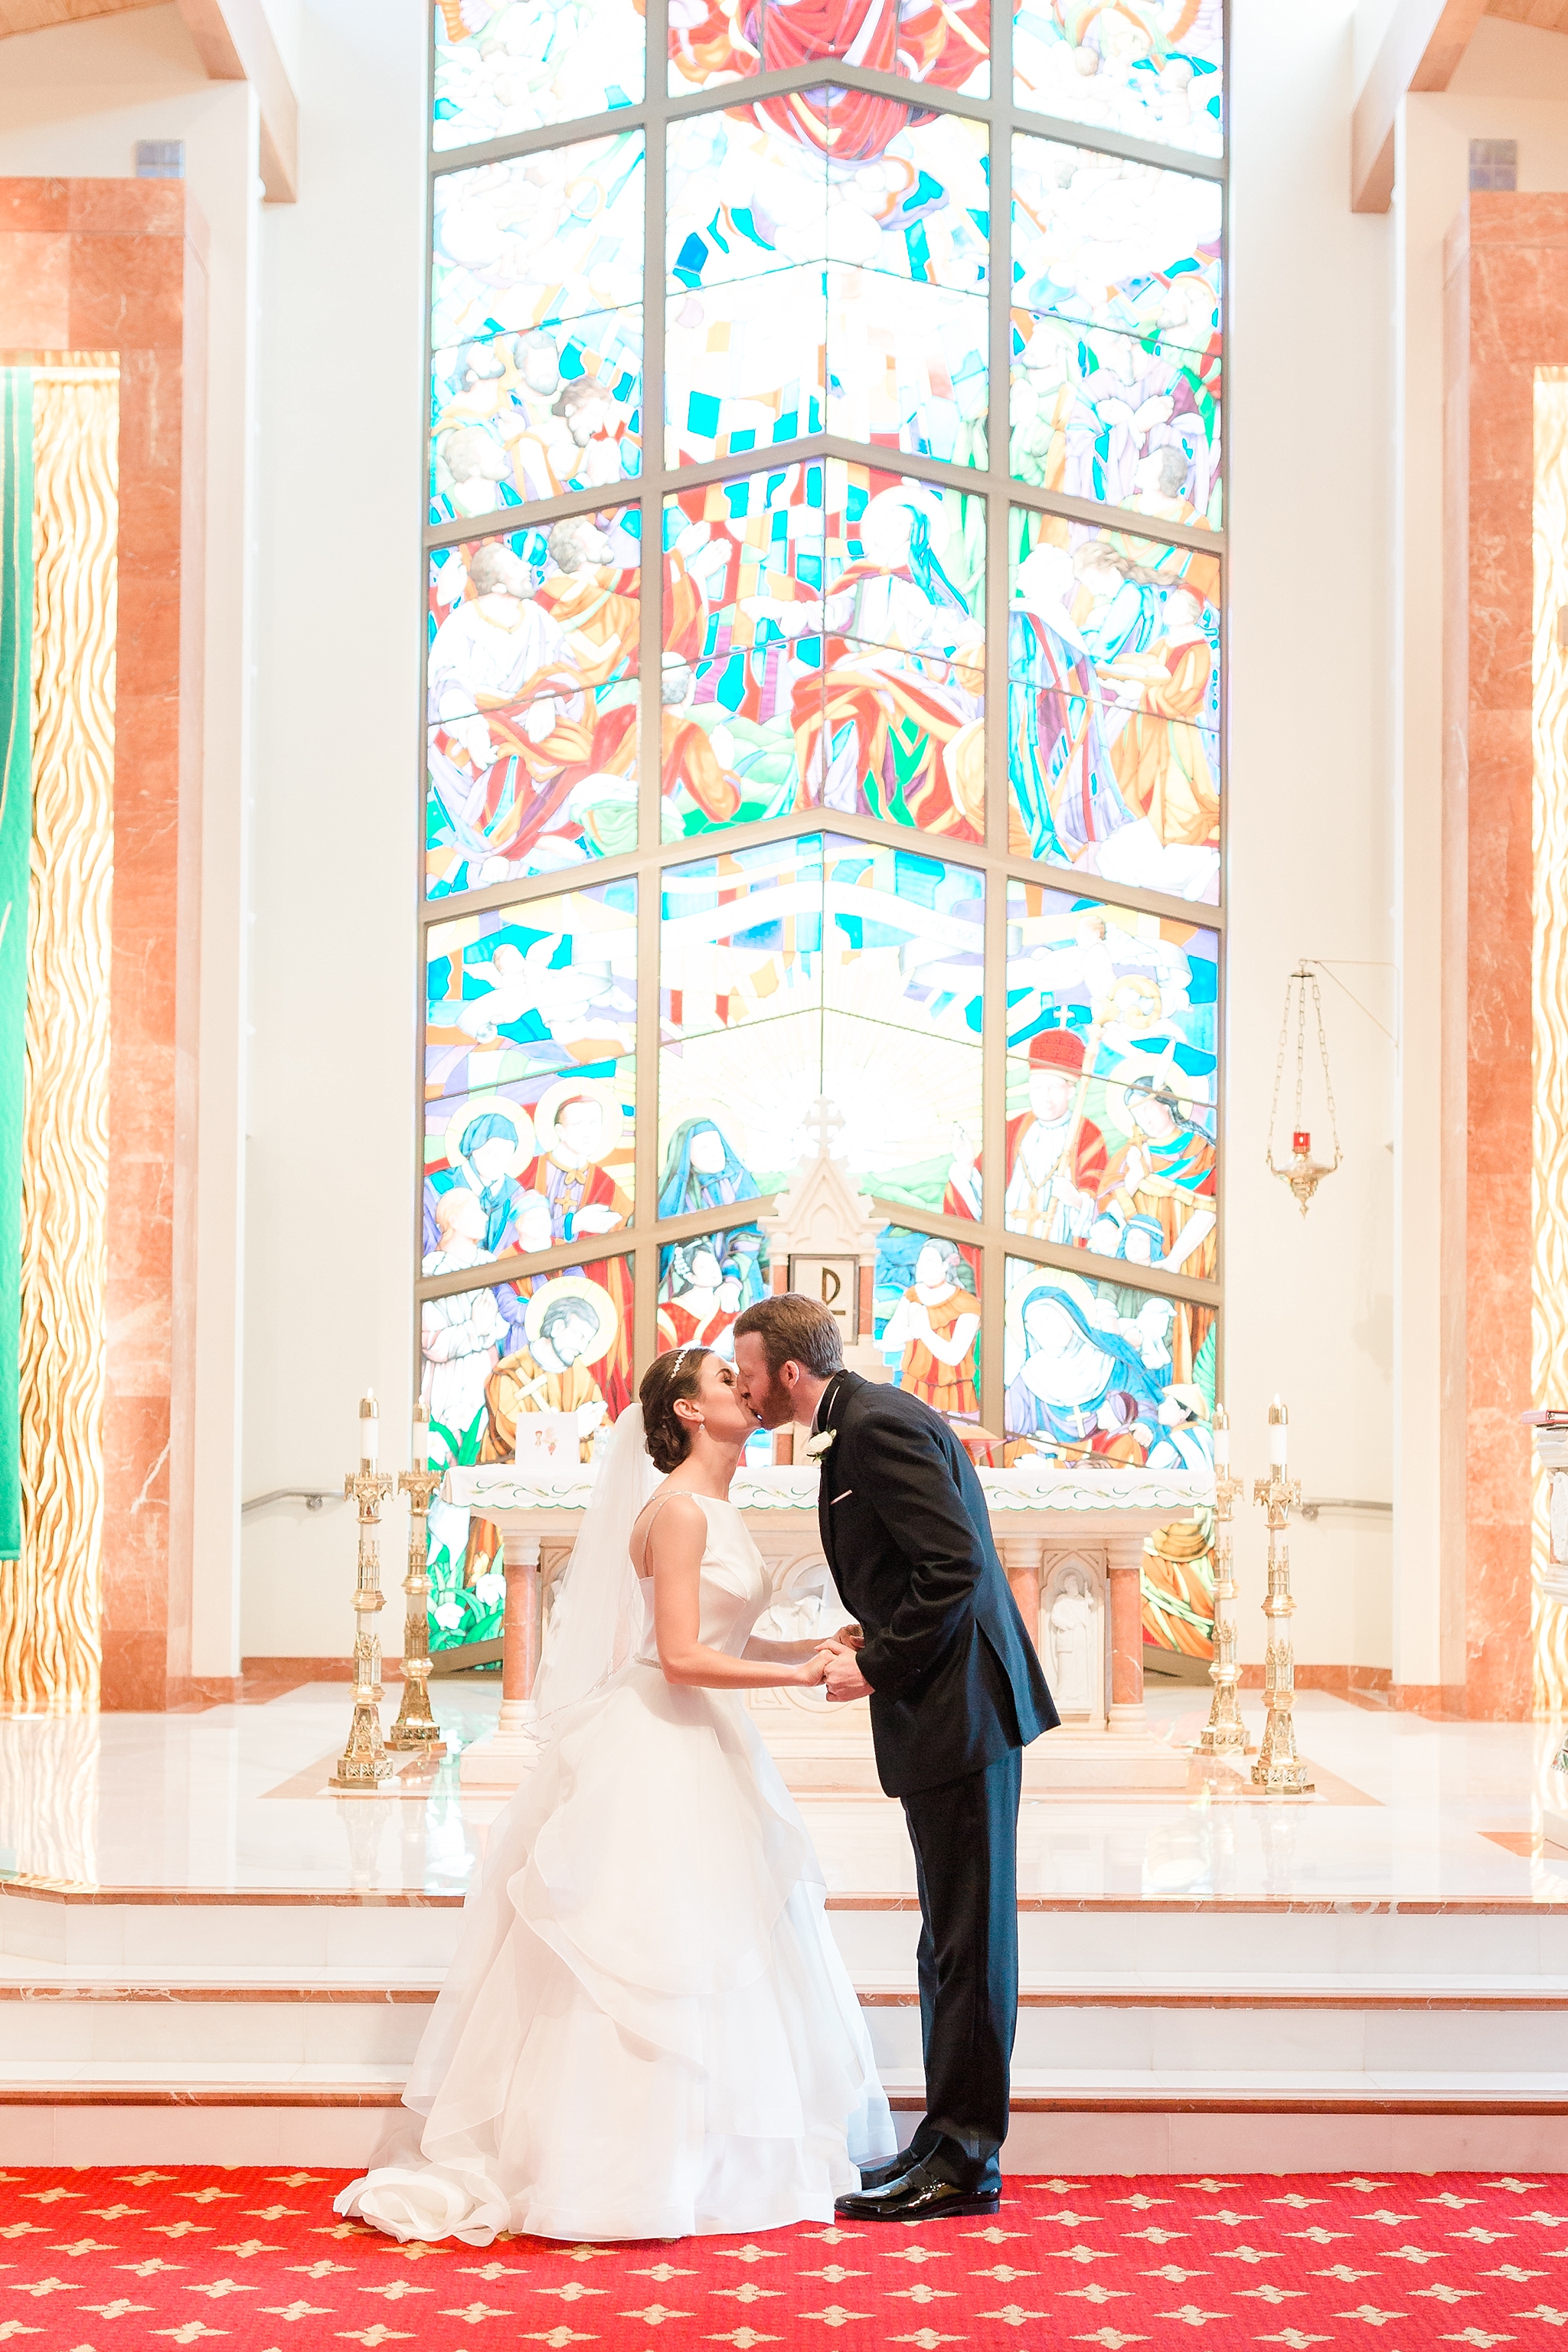 This elegant Whitby Castle wedding features a summery color palette with regal undertones. The entire day was photographed by DC wedding photographer, Alicia Lacey.